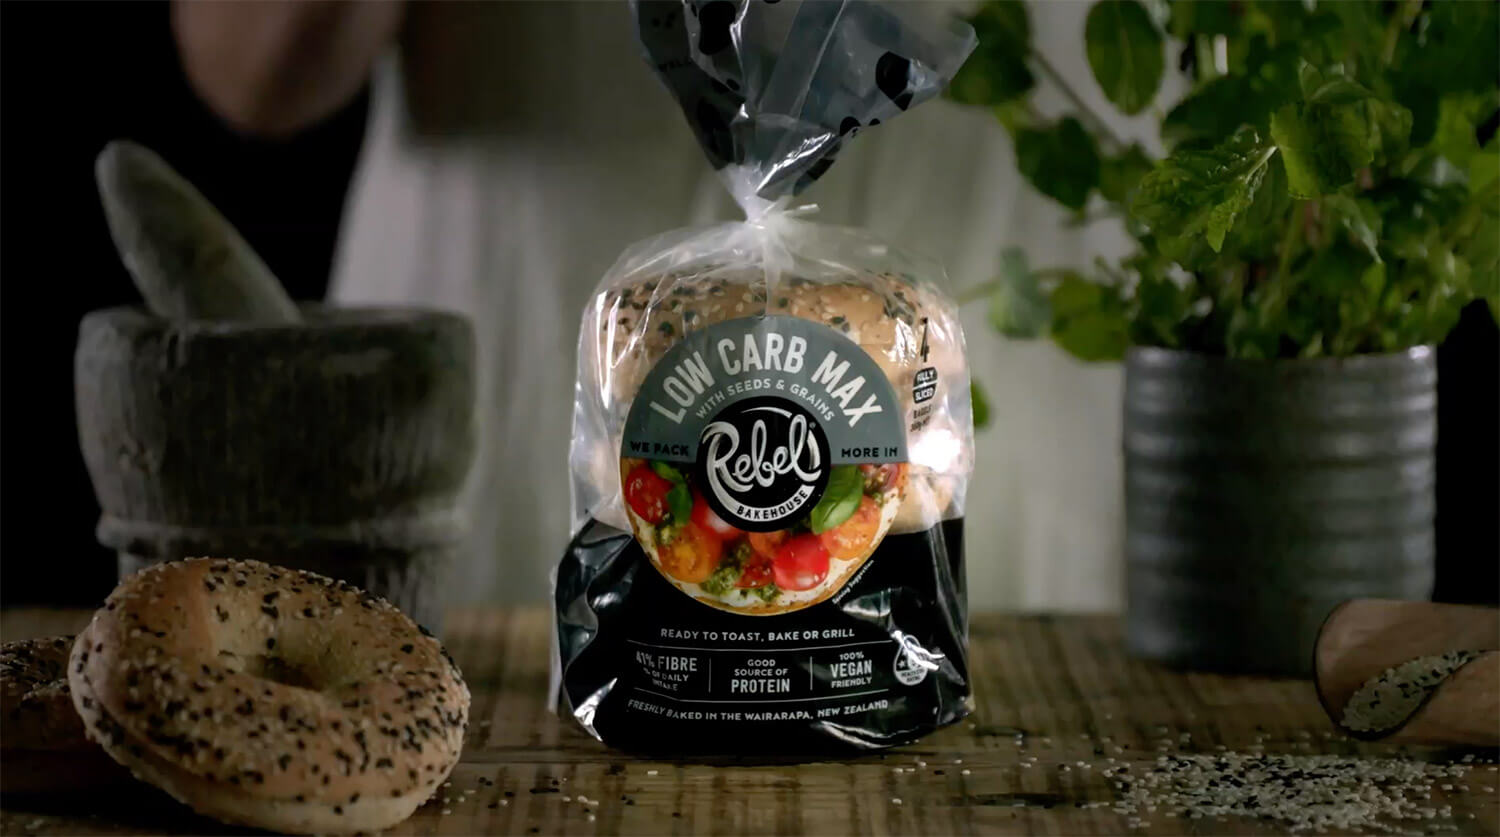 Press Release: Lowest Carb Bagel hits NZ Shelves Today!